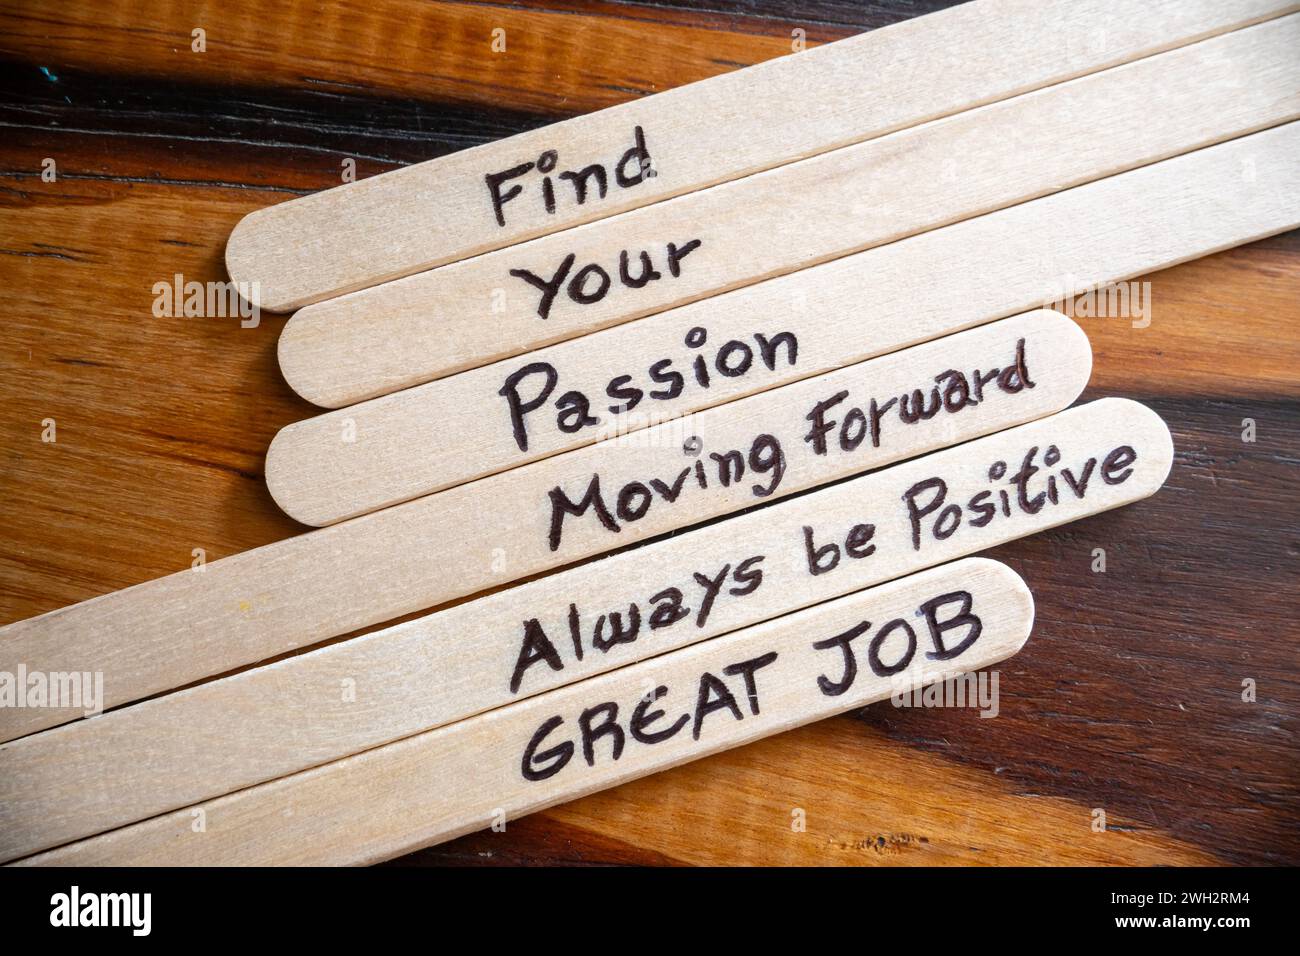 Concept of motivational words on ice cream sticks on a table. Stock Photo